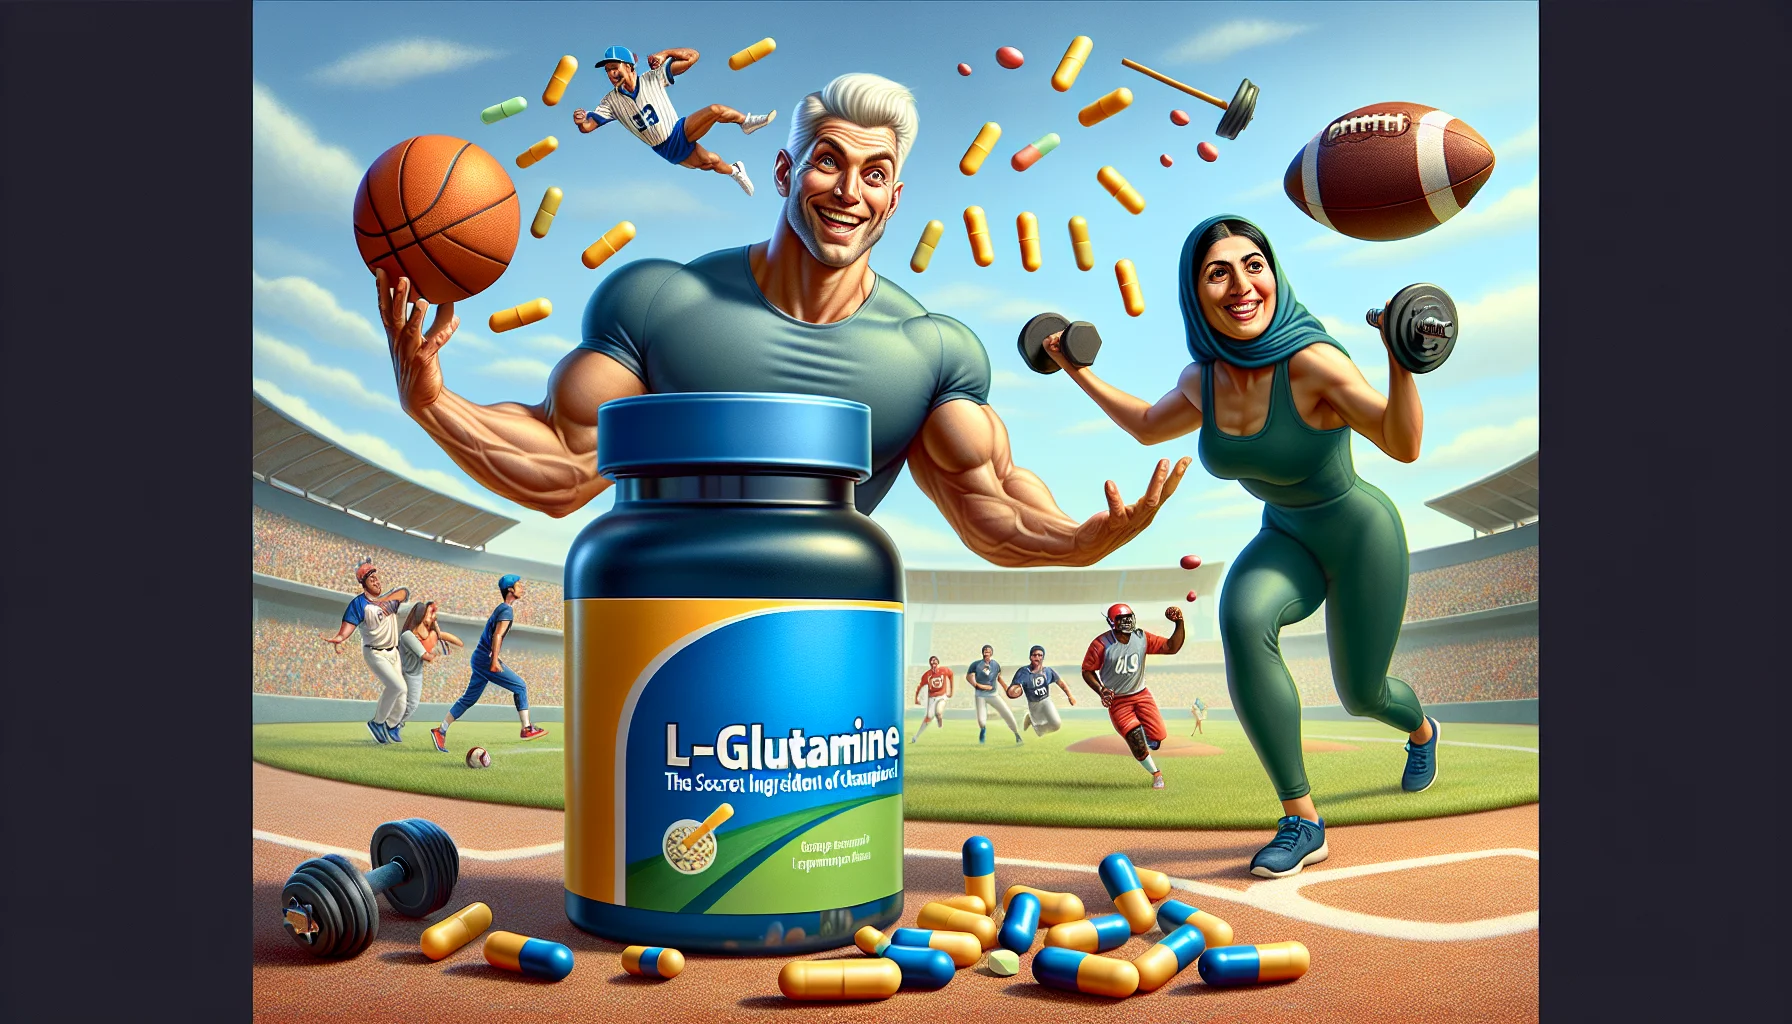 An amusing and realistic illustration revolving around the concept of L-Glutamine supplements. In the foreground, an athletic Caucasian male joyously juggling a mix of L-Glutamine capsules and sports equipment like baseball, football, and dumbbell. A Middle-Eastern woman, showing strength, stands next to a large L-Glutamine bottle, with one hand on her hip, other flexing her bicep, smiling towards the viewer. The background features a sports field filled with South-Asian and Hispanic athletes, enjoying their game with a hint of L-Glutamine bottles artistically placed at strategic points. The caption beneath humorously proclaims, 'L-Glutamine: The secret ingredient of champions!'.